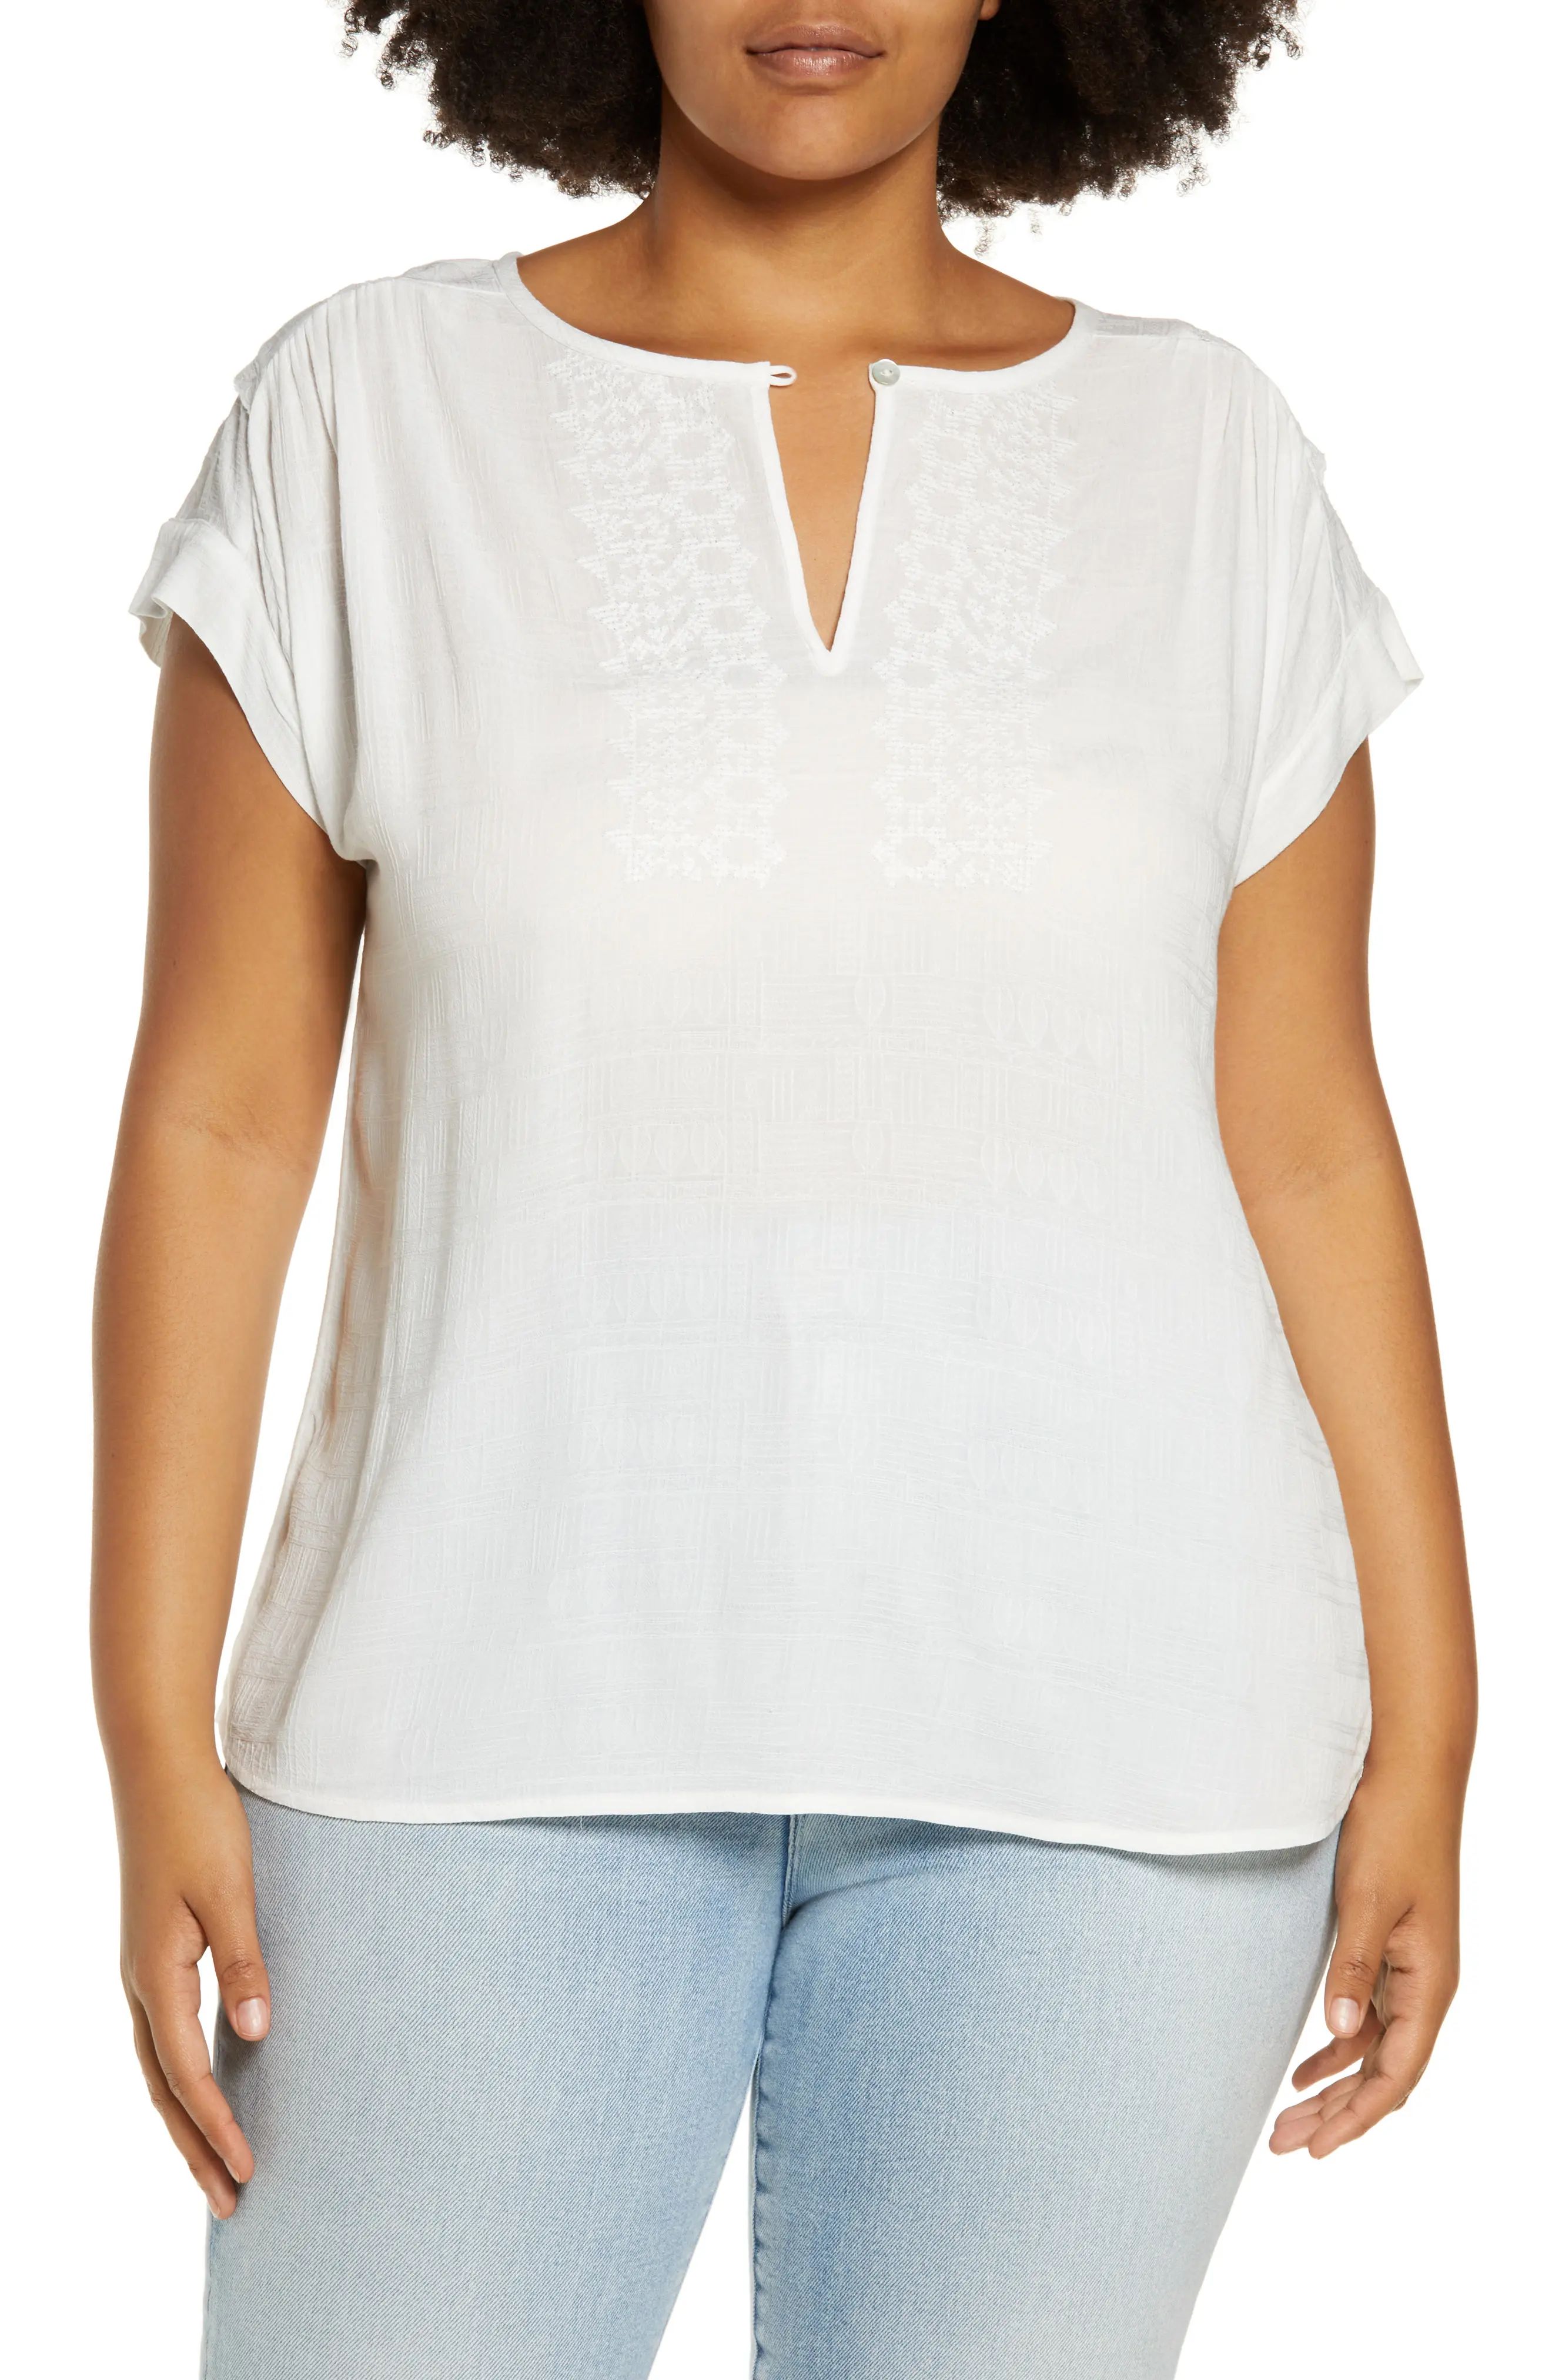 Wit & Wisdom Embroidered Split Neck Top in Off White at Nordstrom, Size 1X | Nordstrom